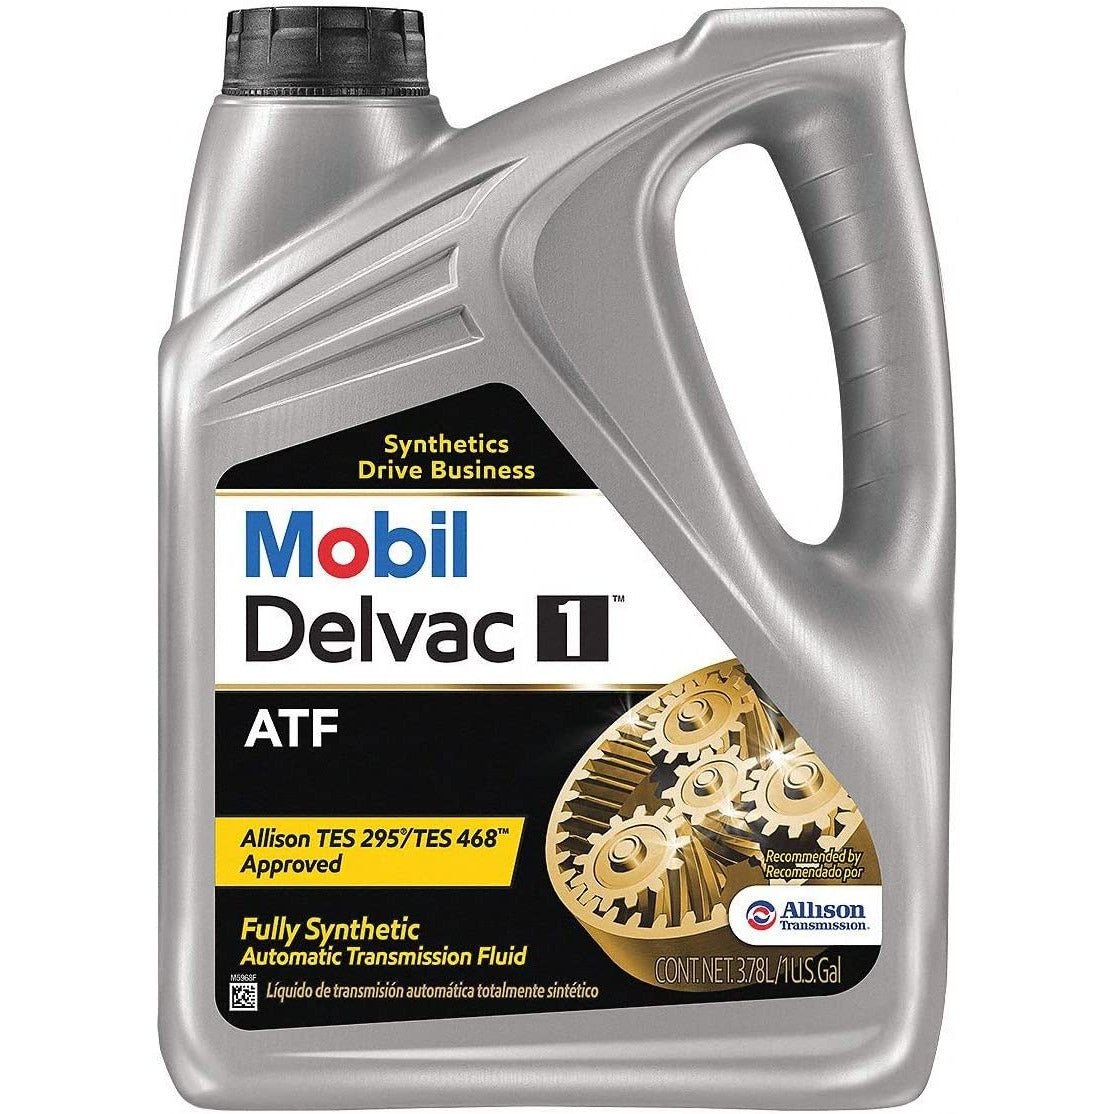 MOB 44006 Mobil Delvac 1 ATF Full Synthetic (1 Gal)